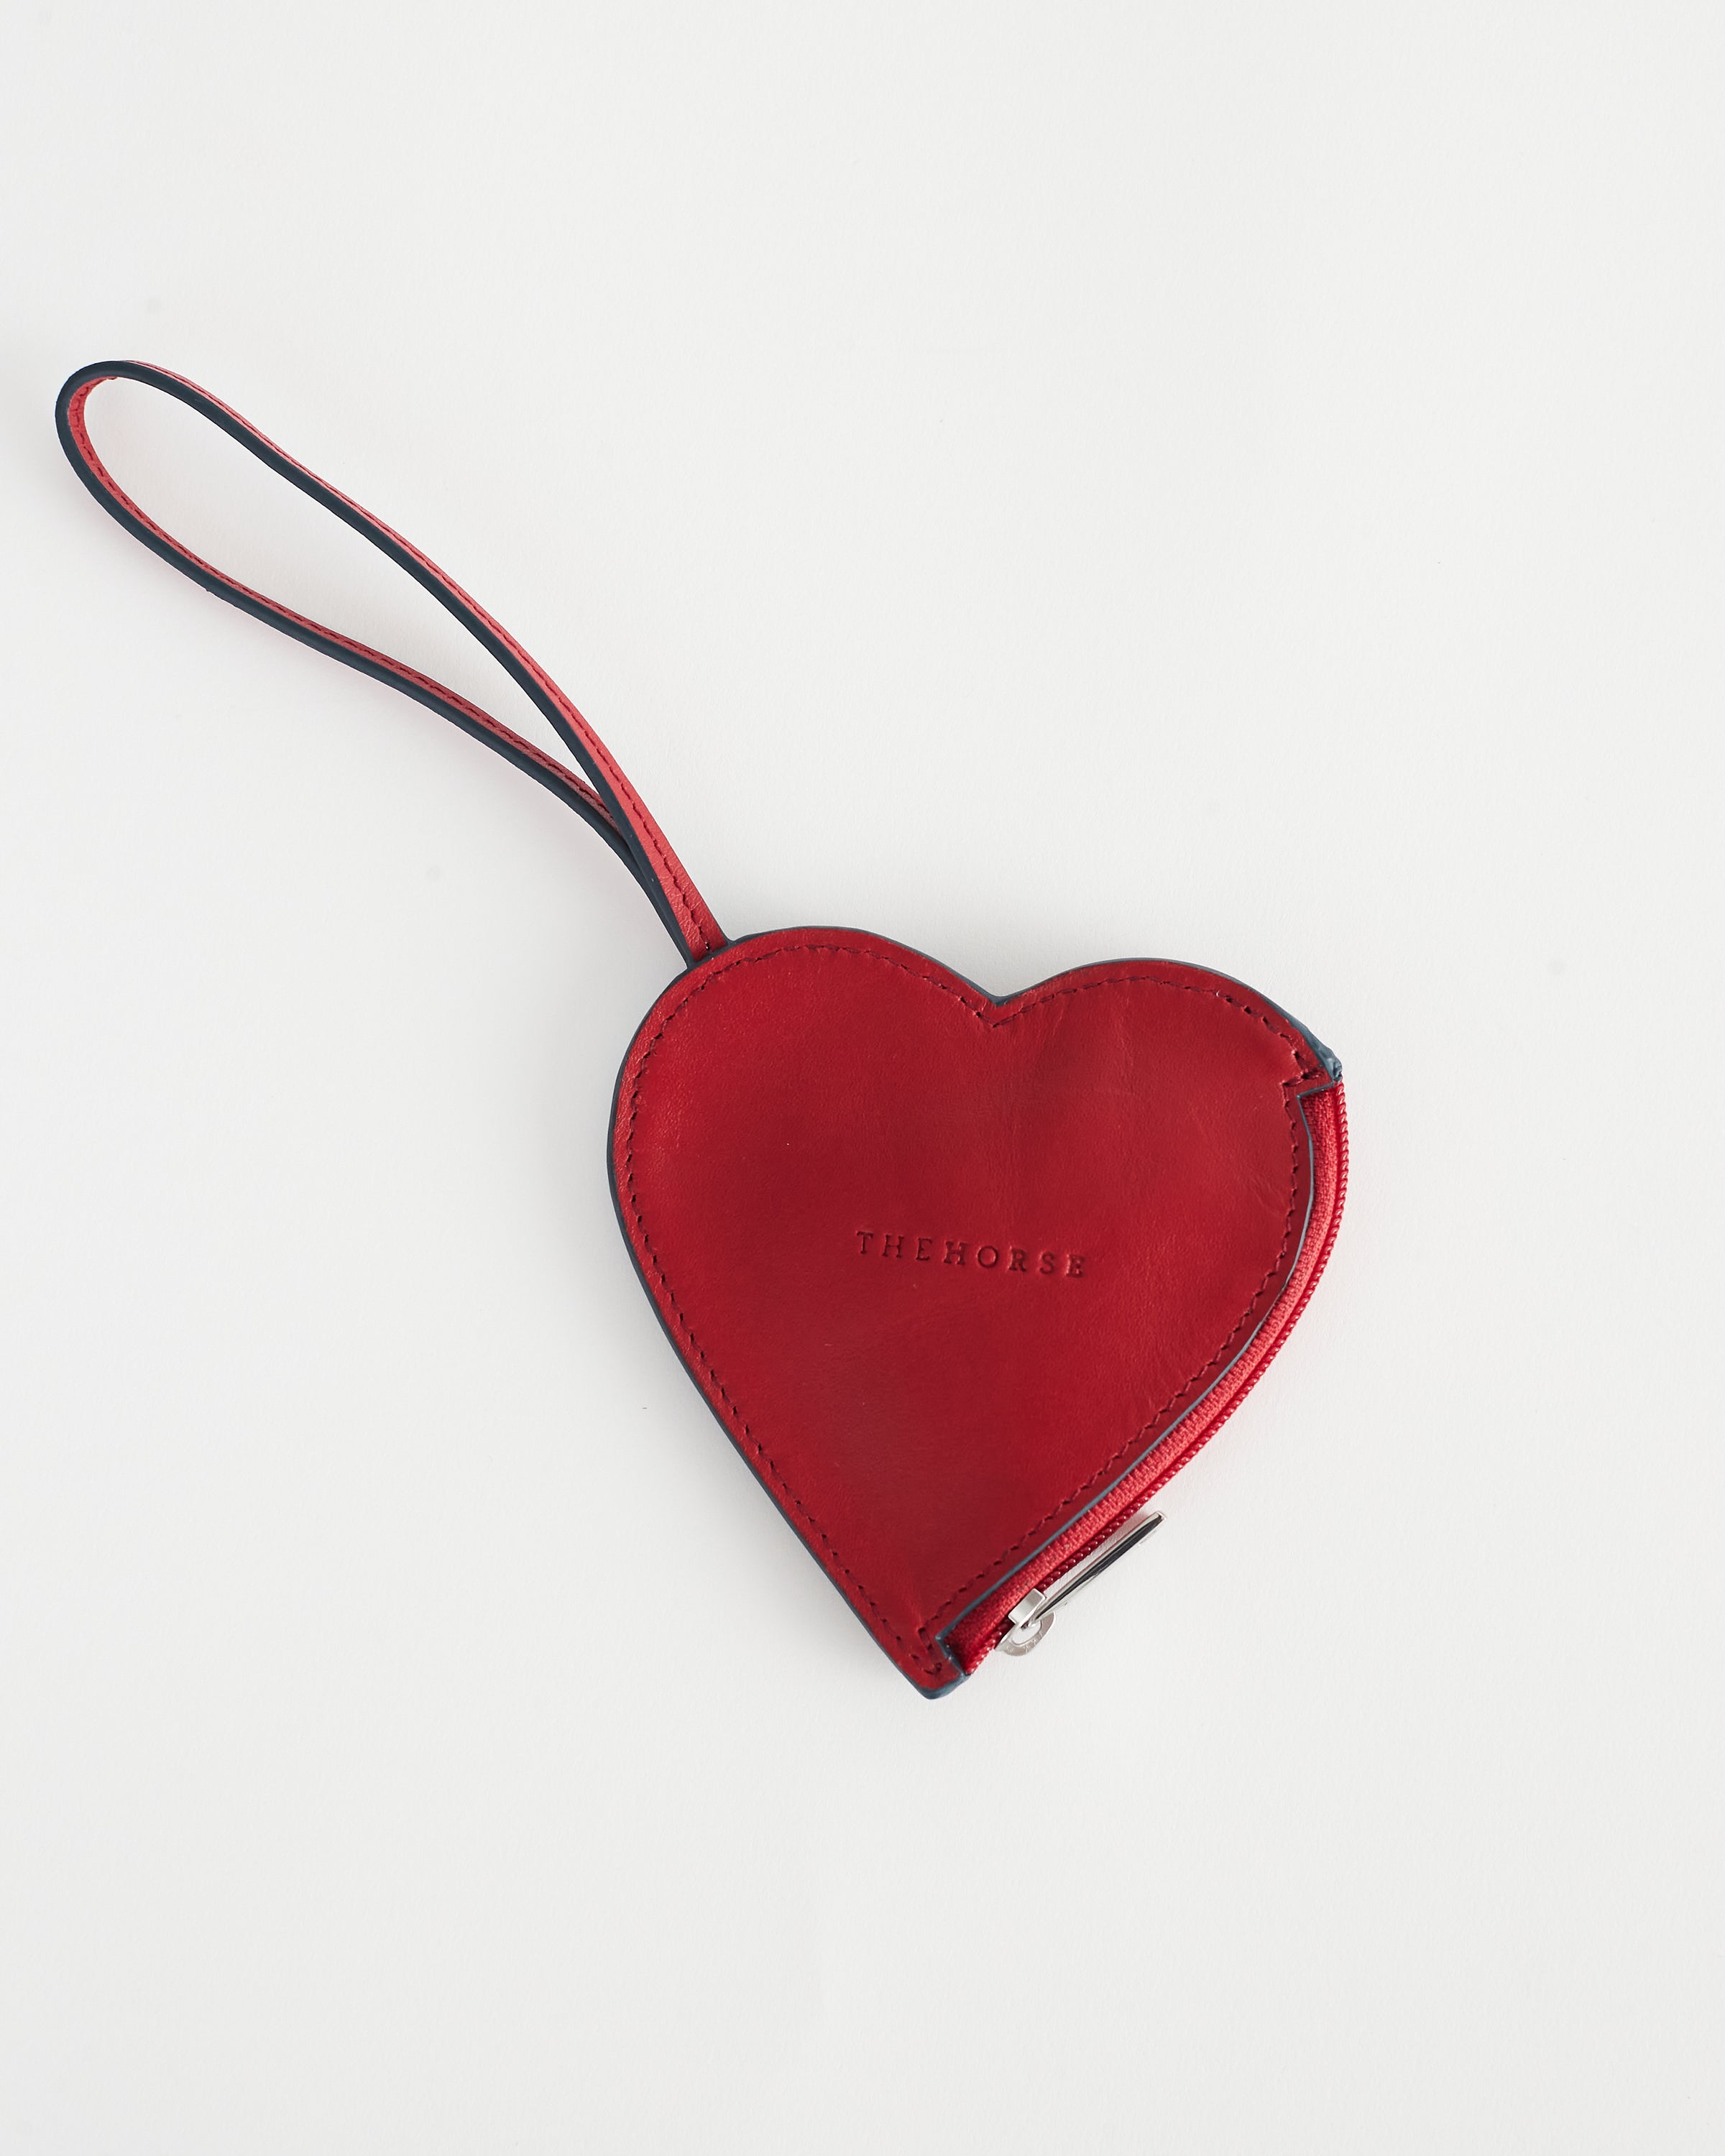 Heart Shaped Leather Coin Pouch in Red by The Horse®